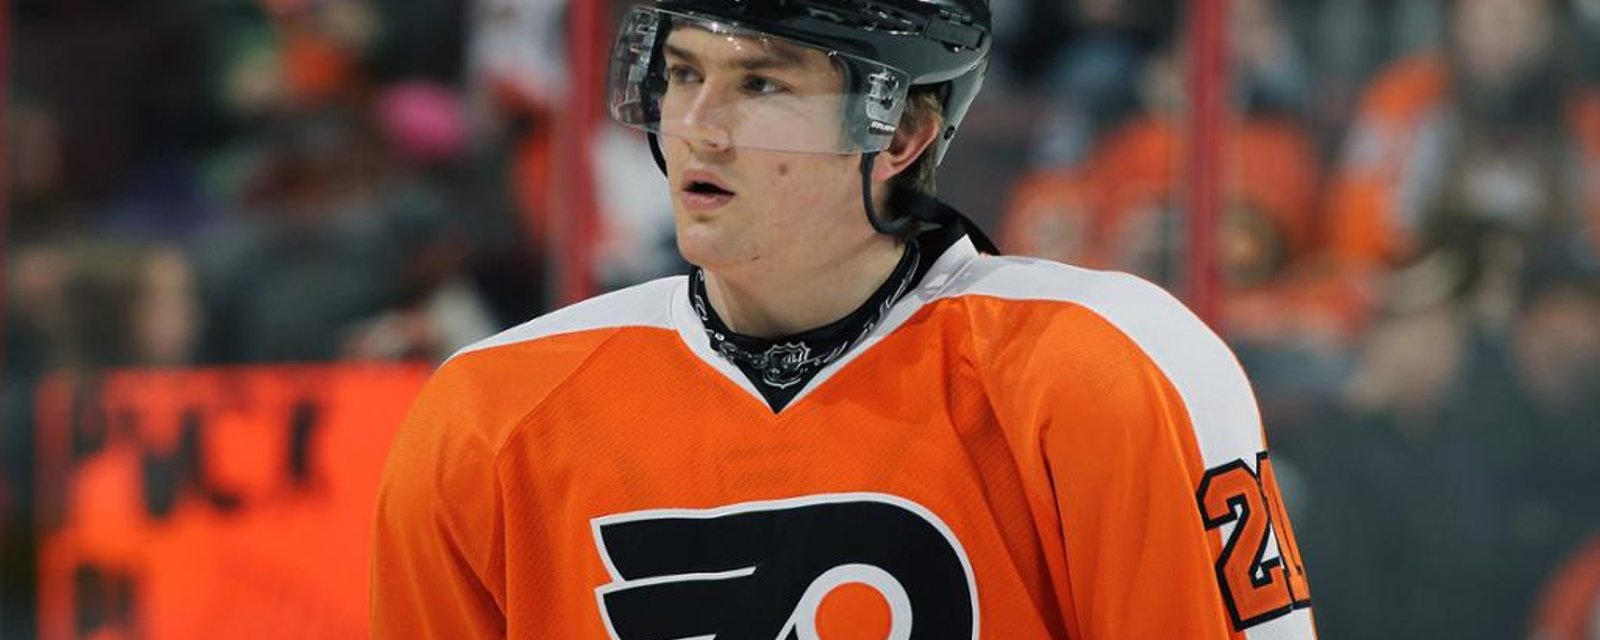 The Flyers wanted another star player over JVR! 